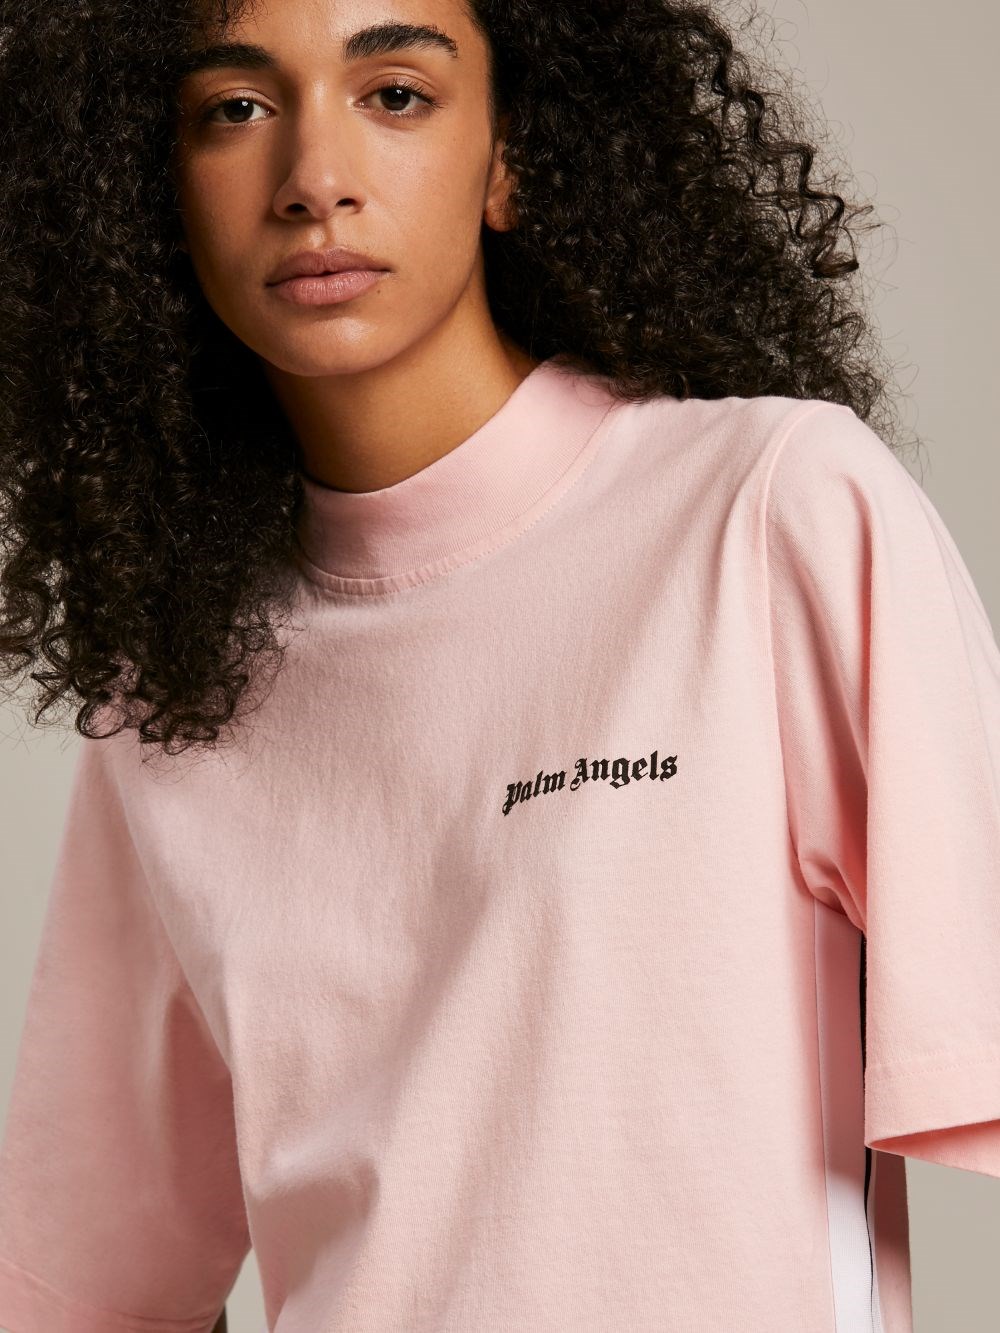 palm angels LOGO T-SHIRT available on montiboutique.com - 40650